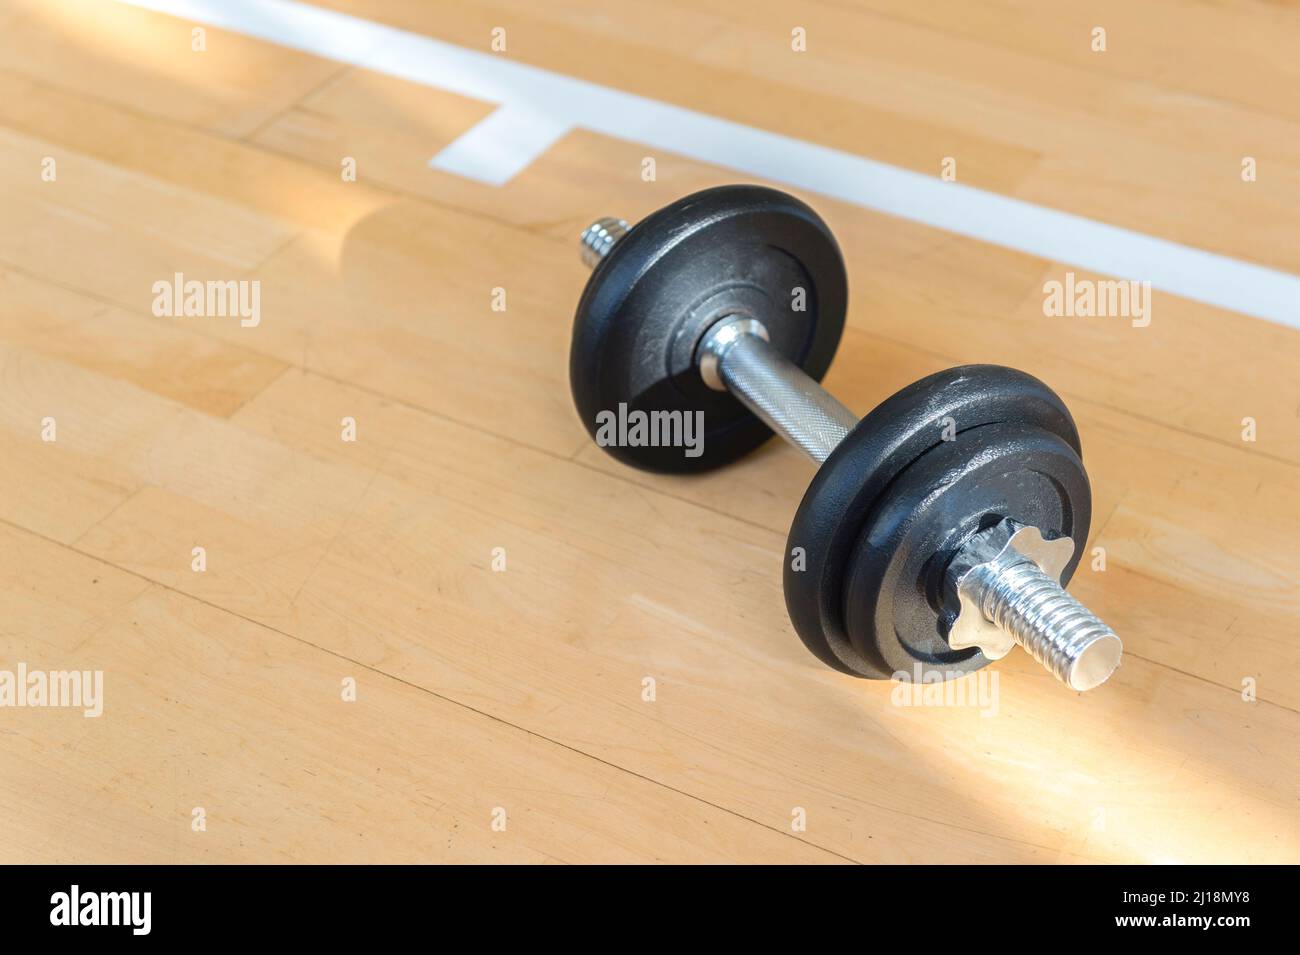 Dumbbell on wooden surface. Concept of rehabilitation and sport training equipment Stock Photo